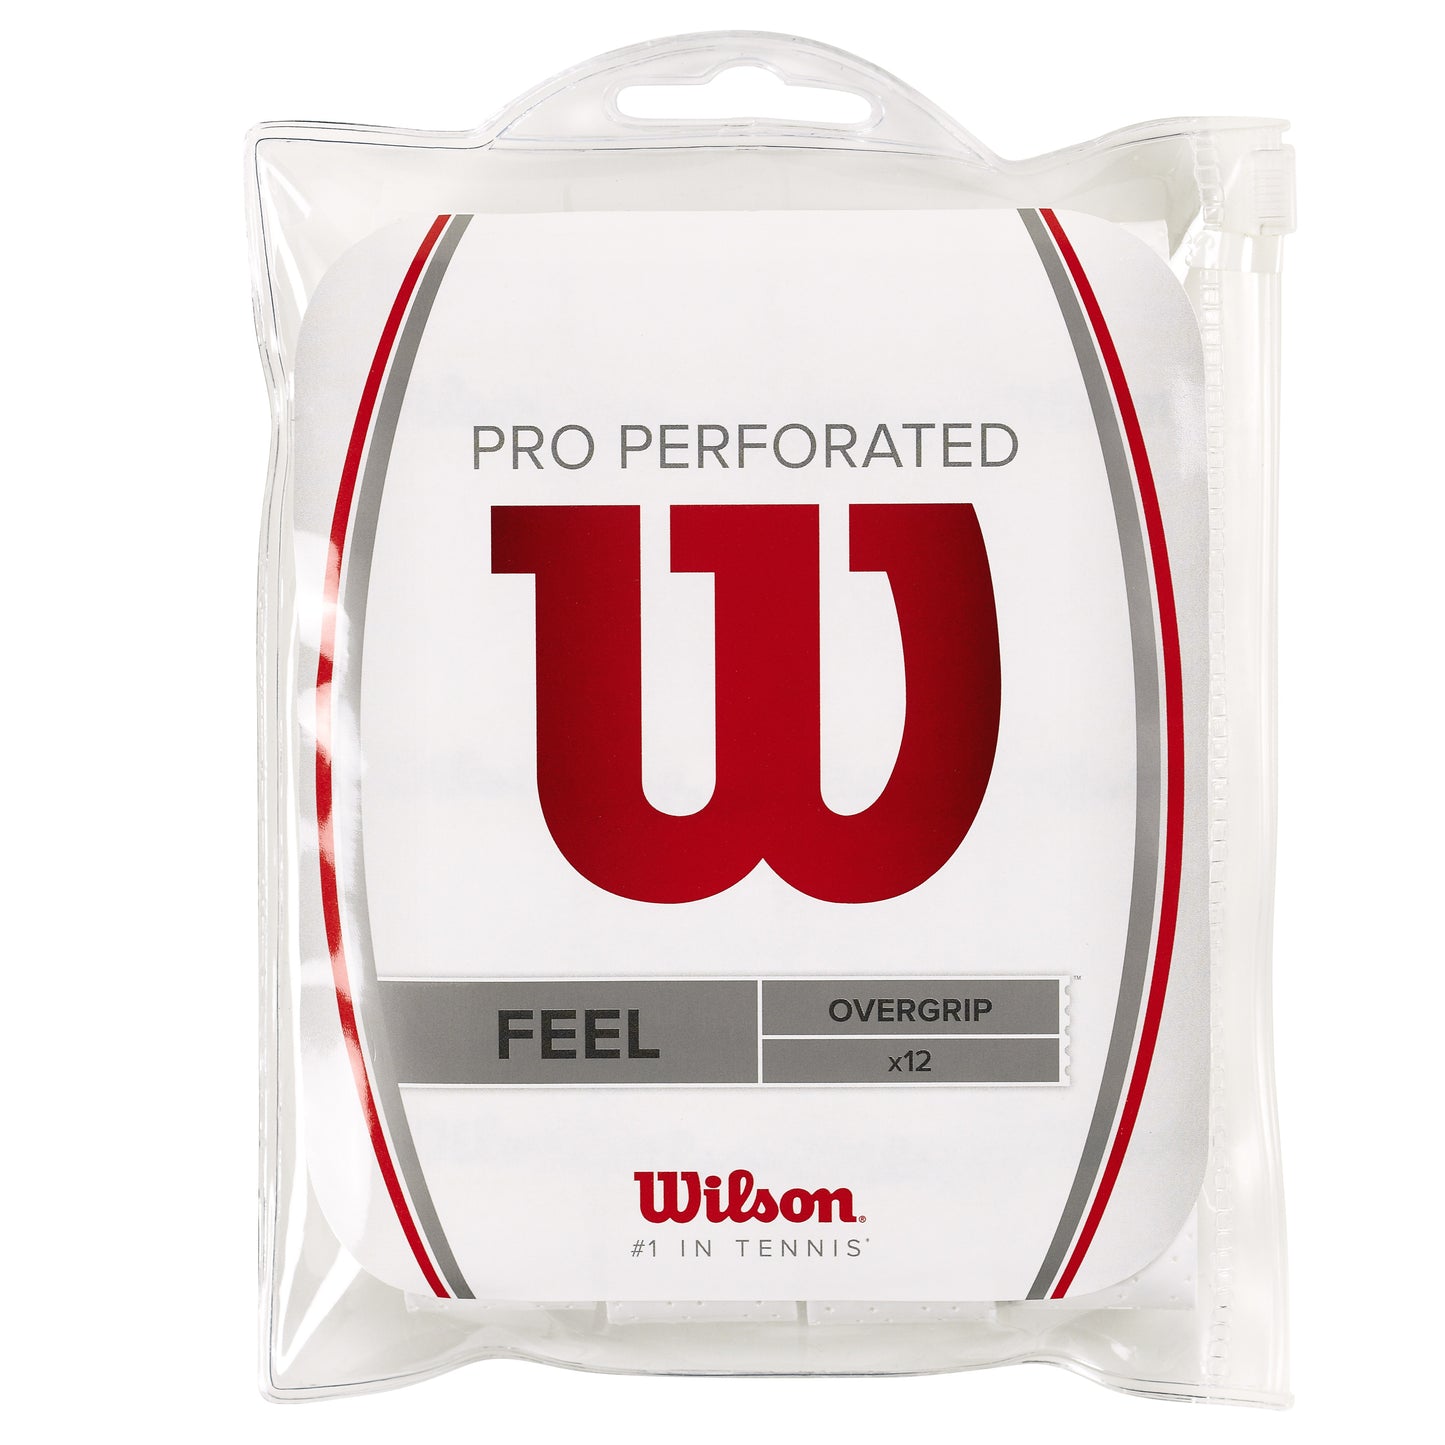 Wilson Pro Perforated White 12-pack overgrip